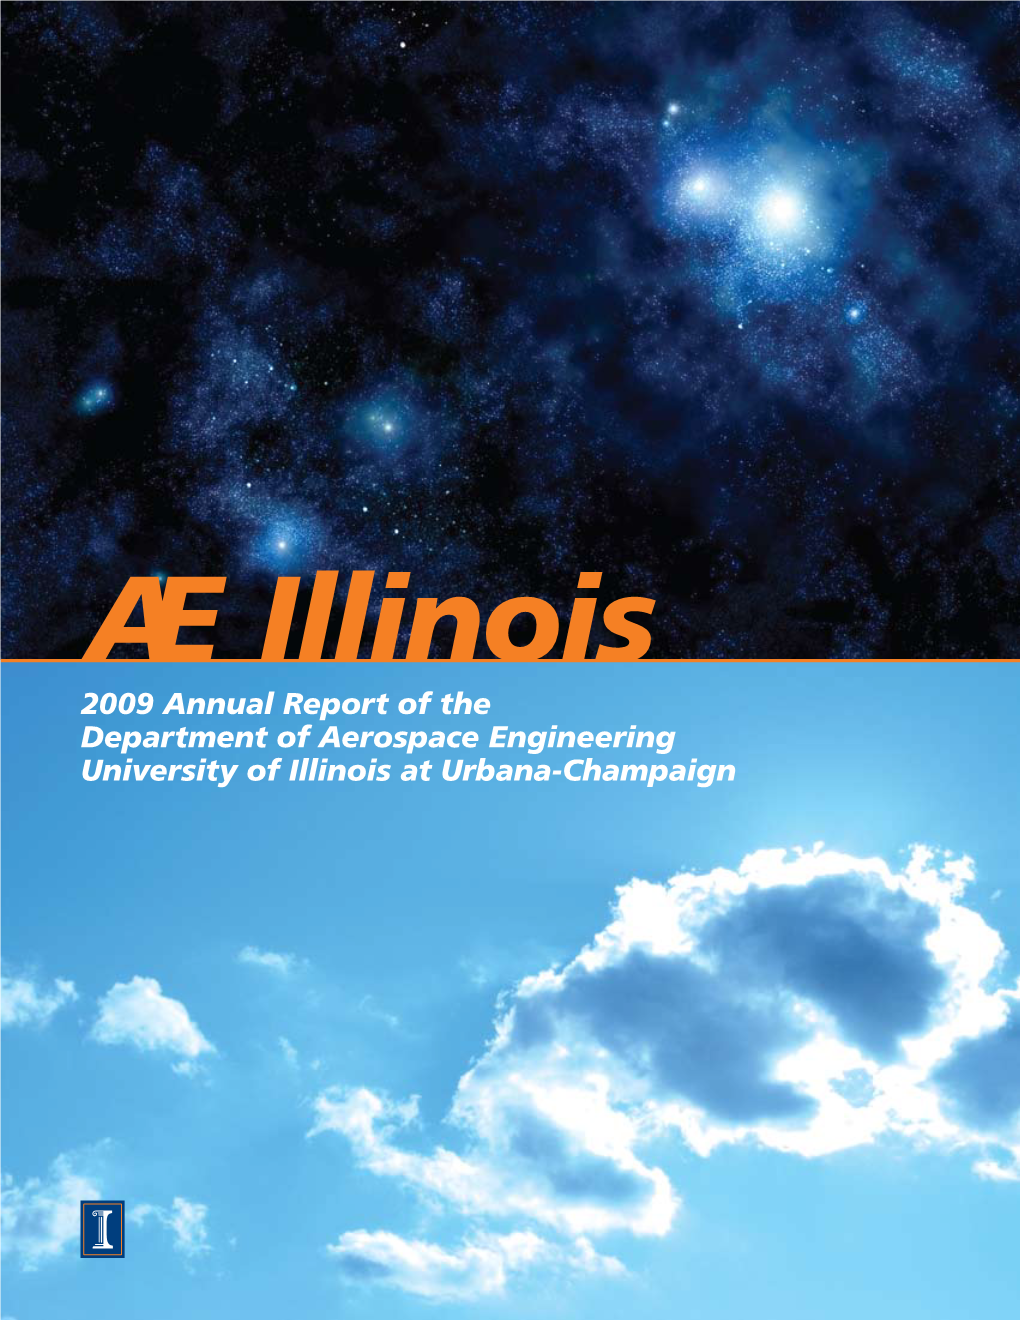 2009 Annual Report of the Department of Aerospace Engineering University of Illinois at Urbana-Champaign 2 AE Illinois 2009 Annual Report